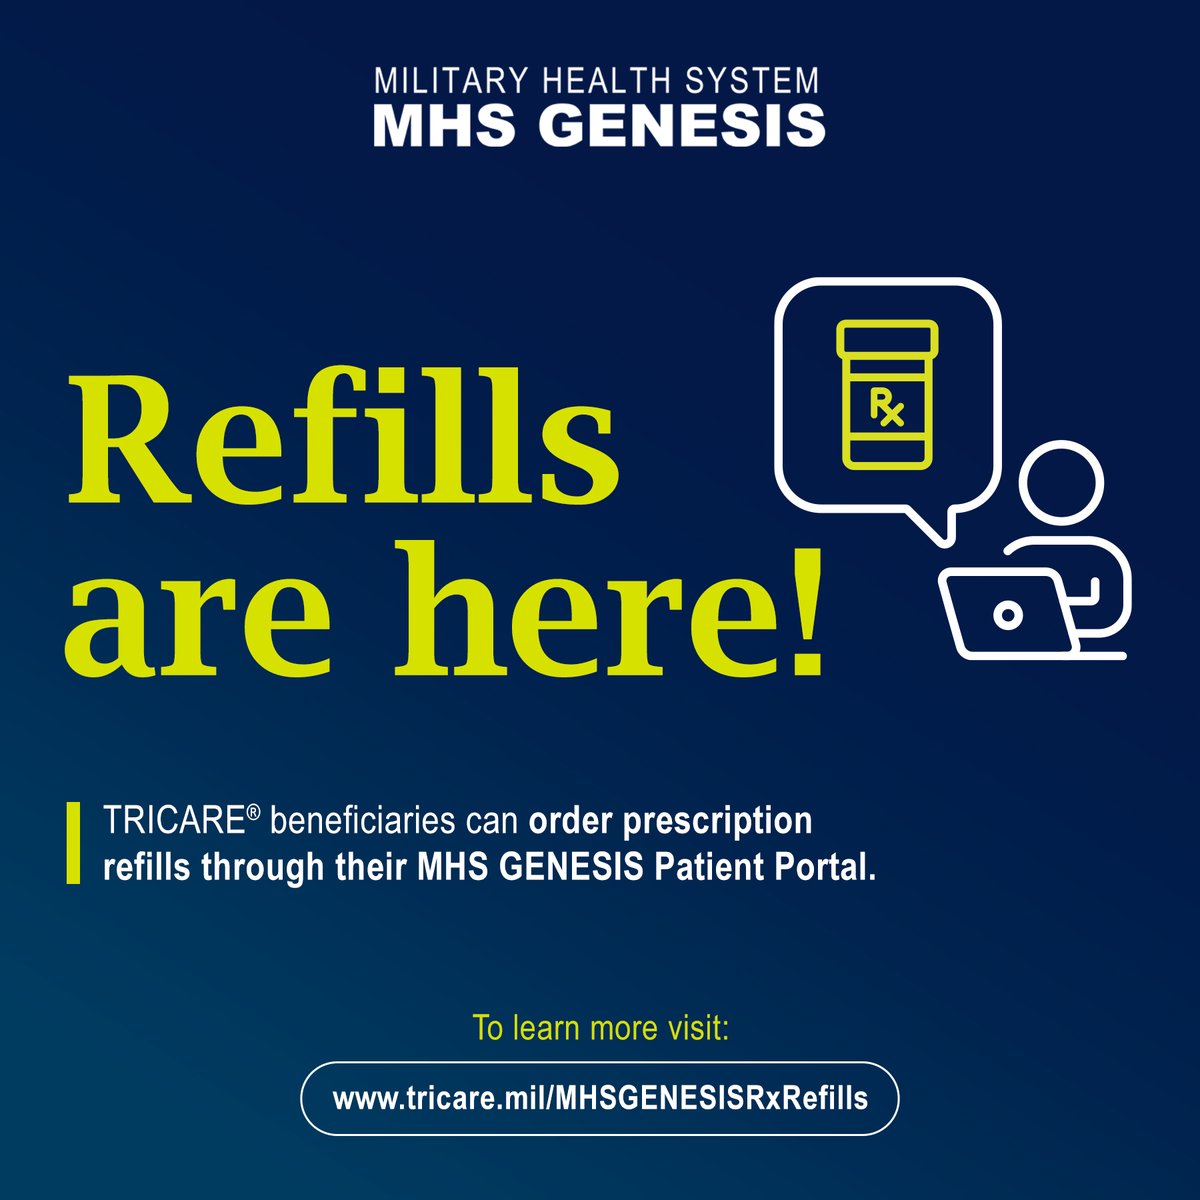 DYK? You can refill your prescriptions at your military pharmacy using the MHS GENESIS Patient Portal. Learn more about this new feature at: tricare.mil/MHSGENESISRxRe…